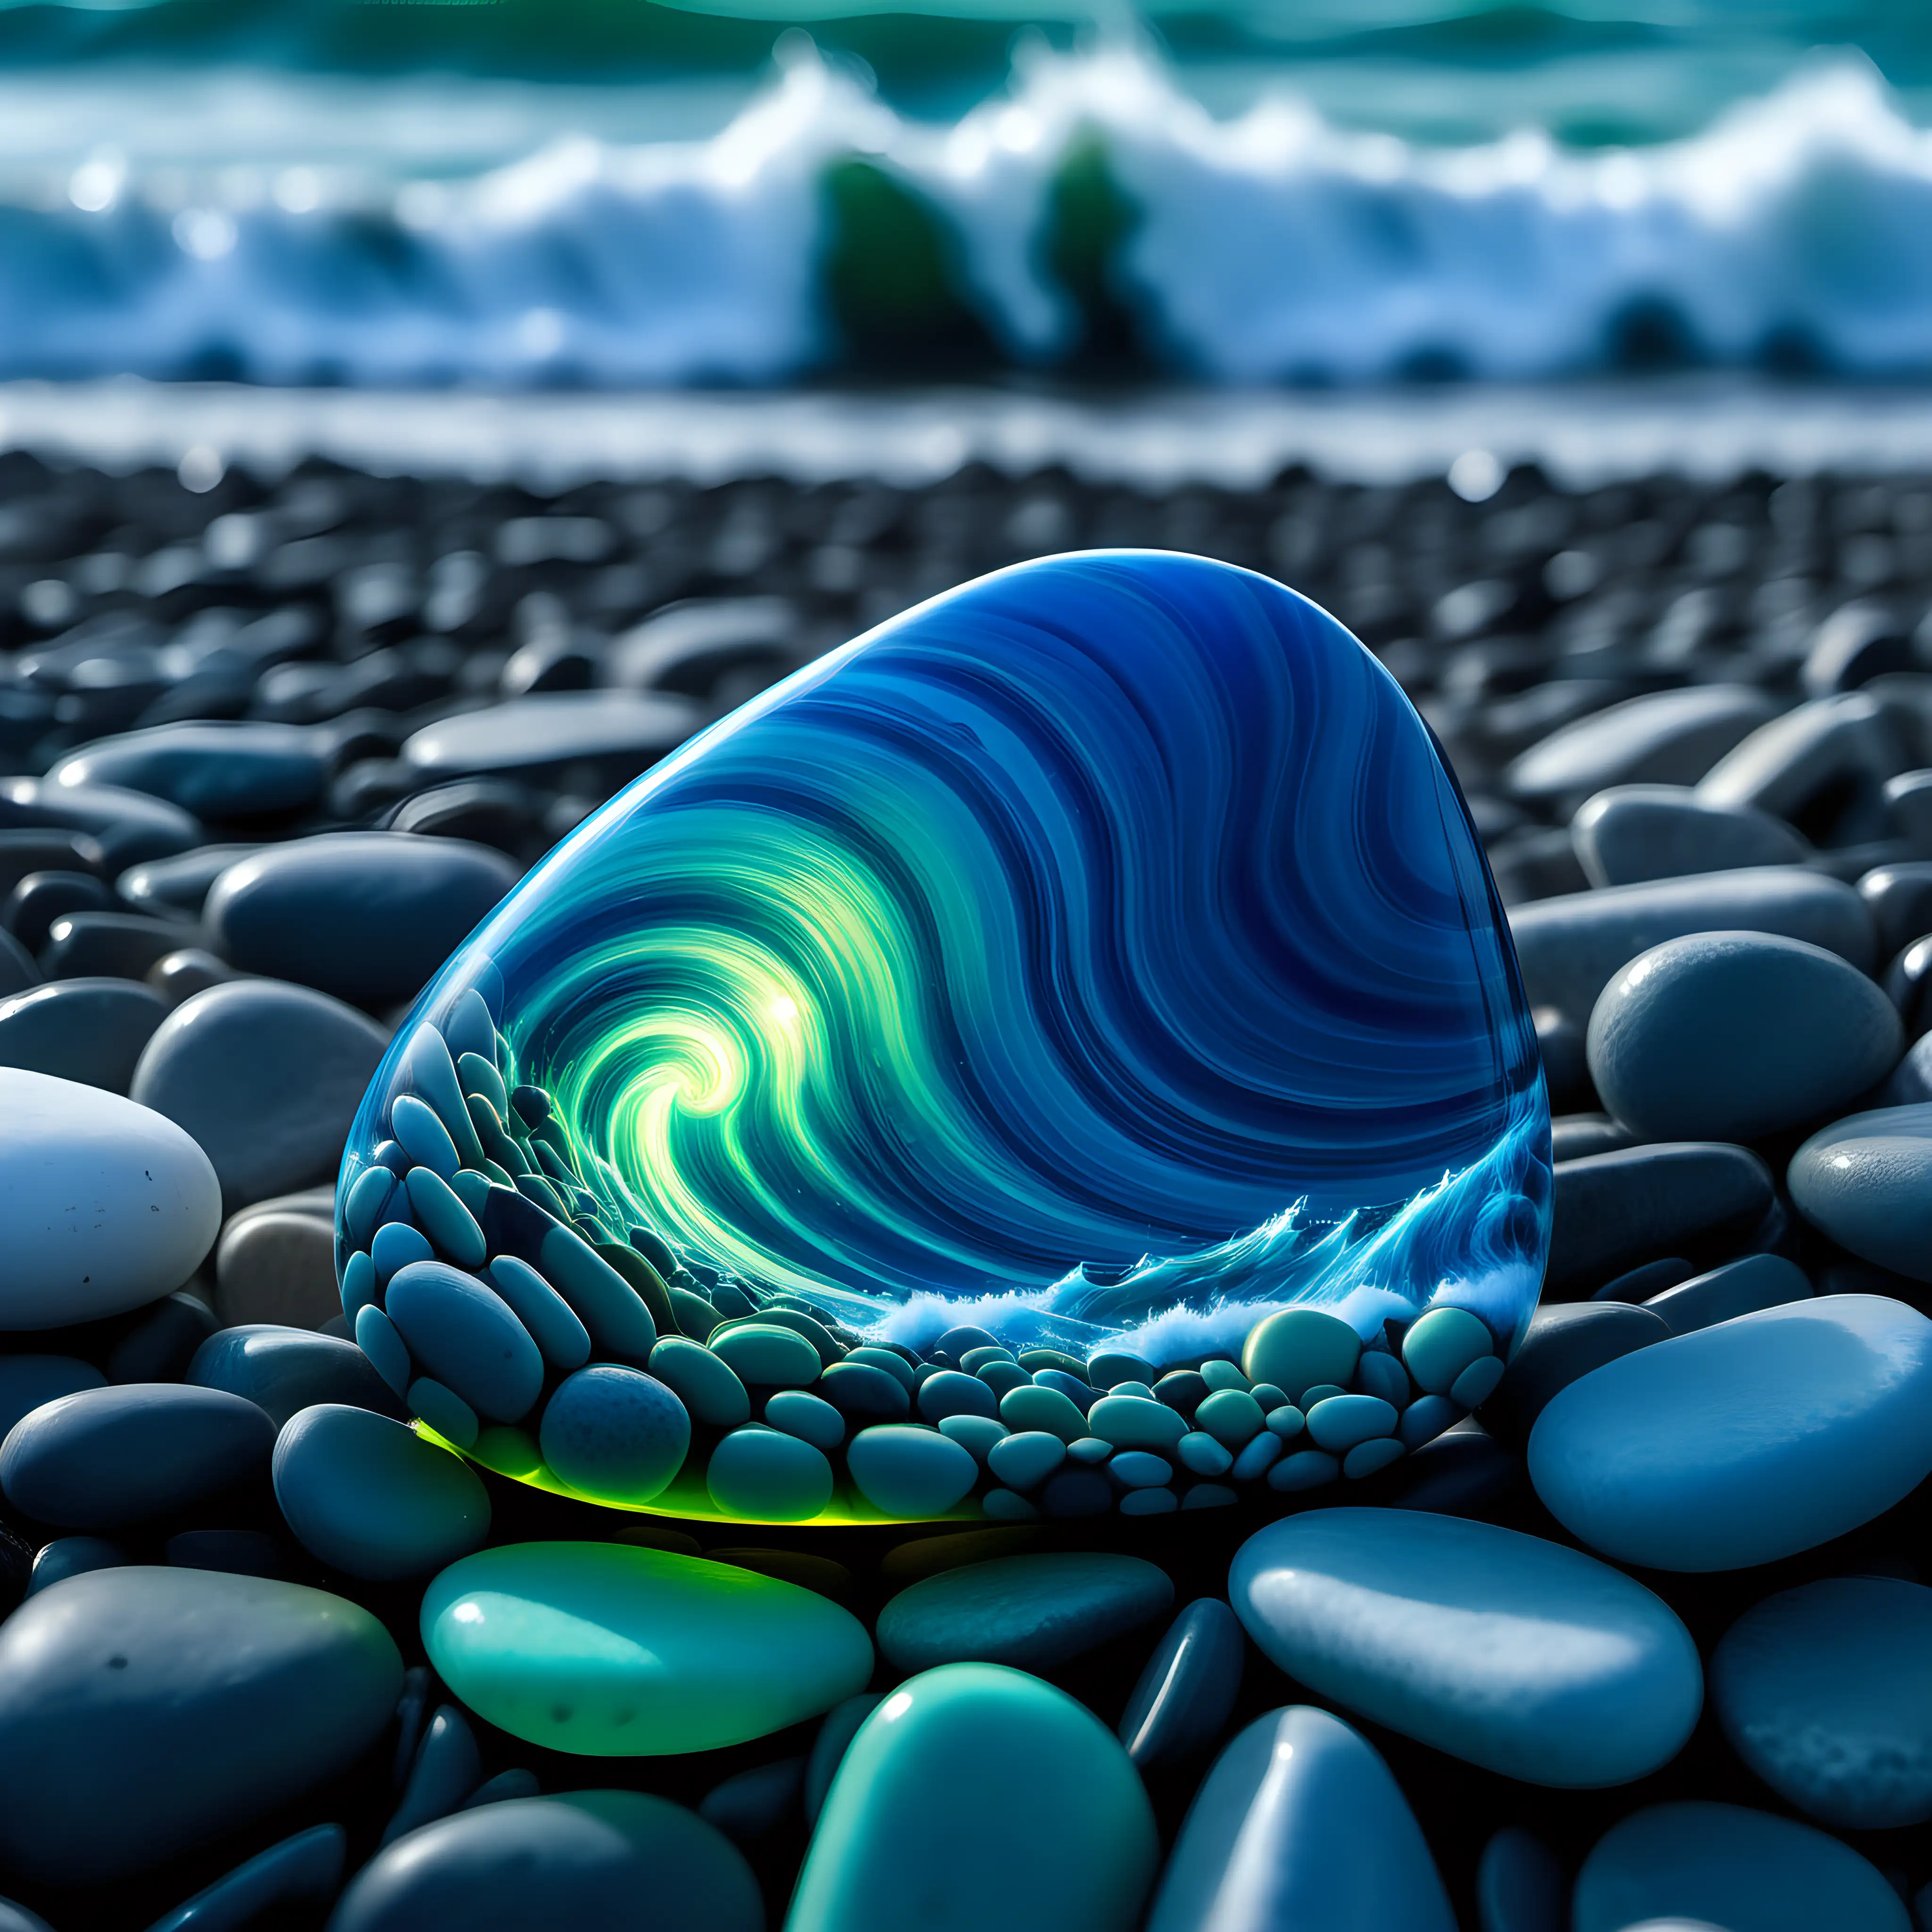 Glowing Variegated Blue Pebble Stone Amidst Giant Tidal Wave